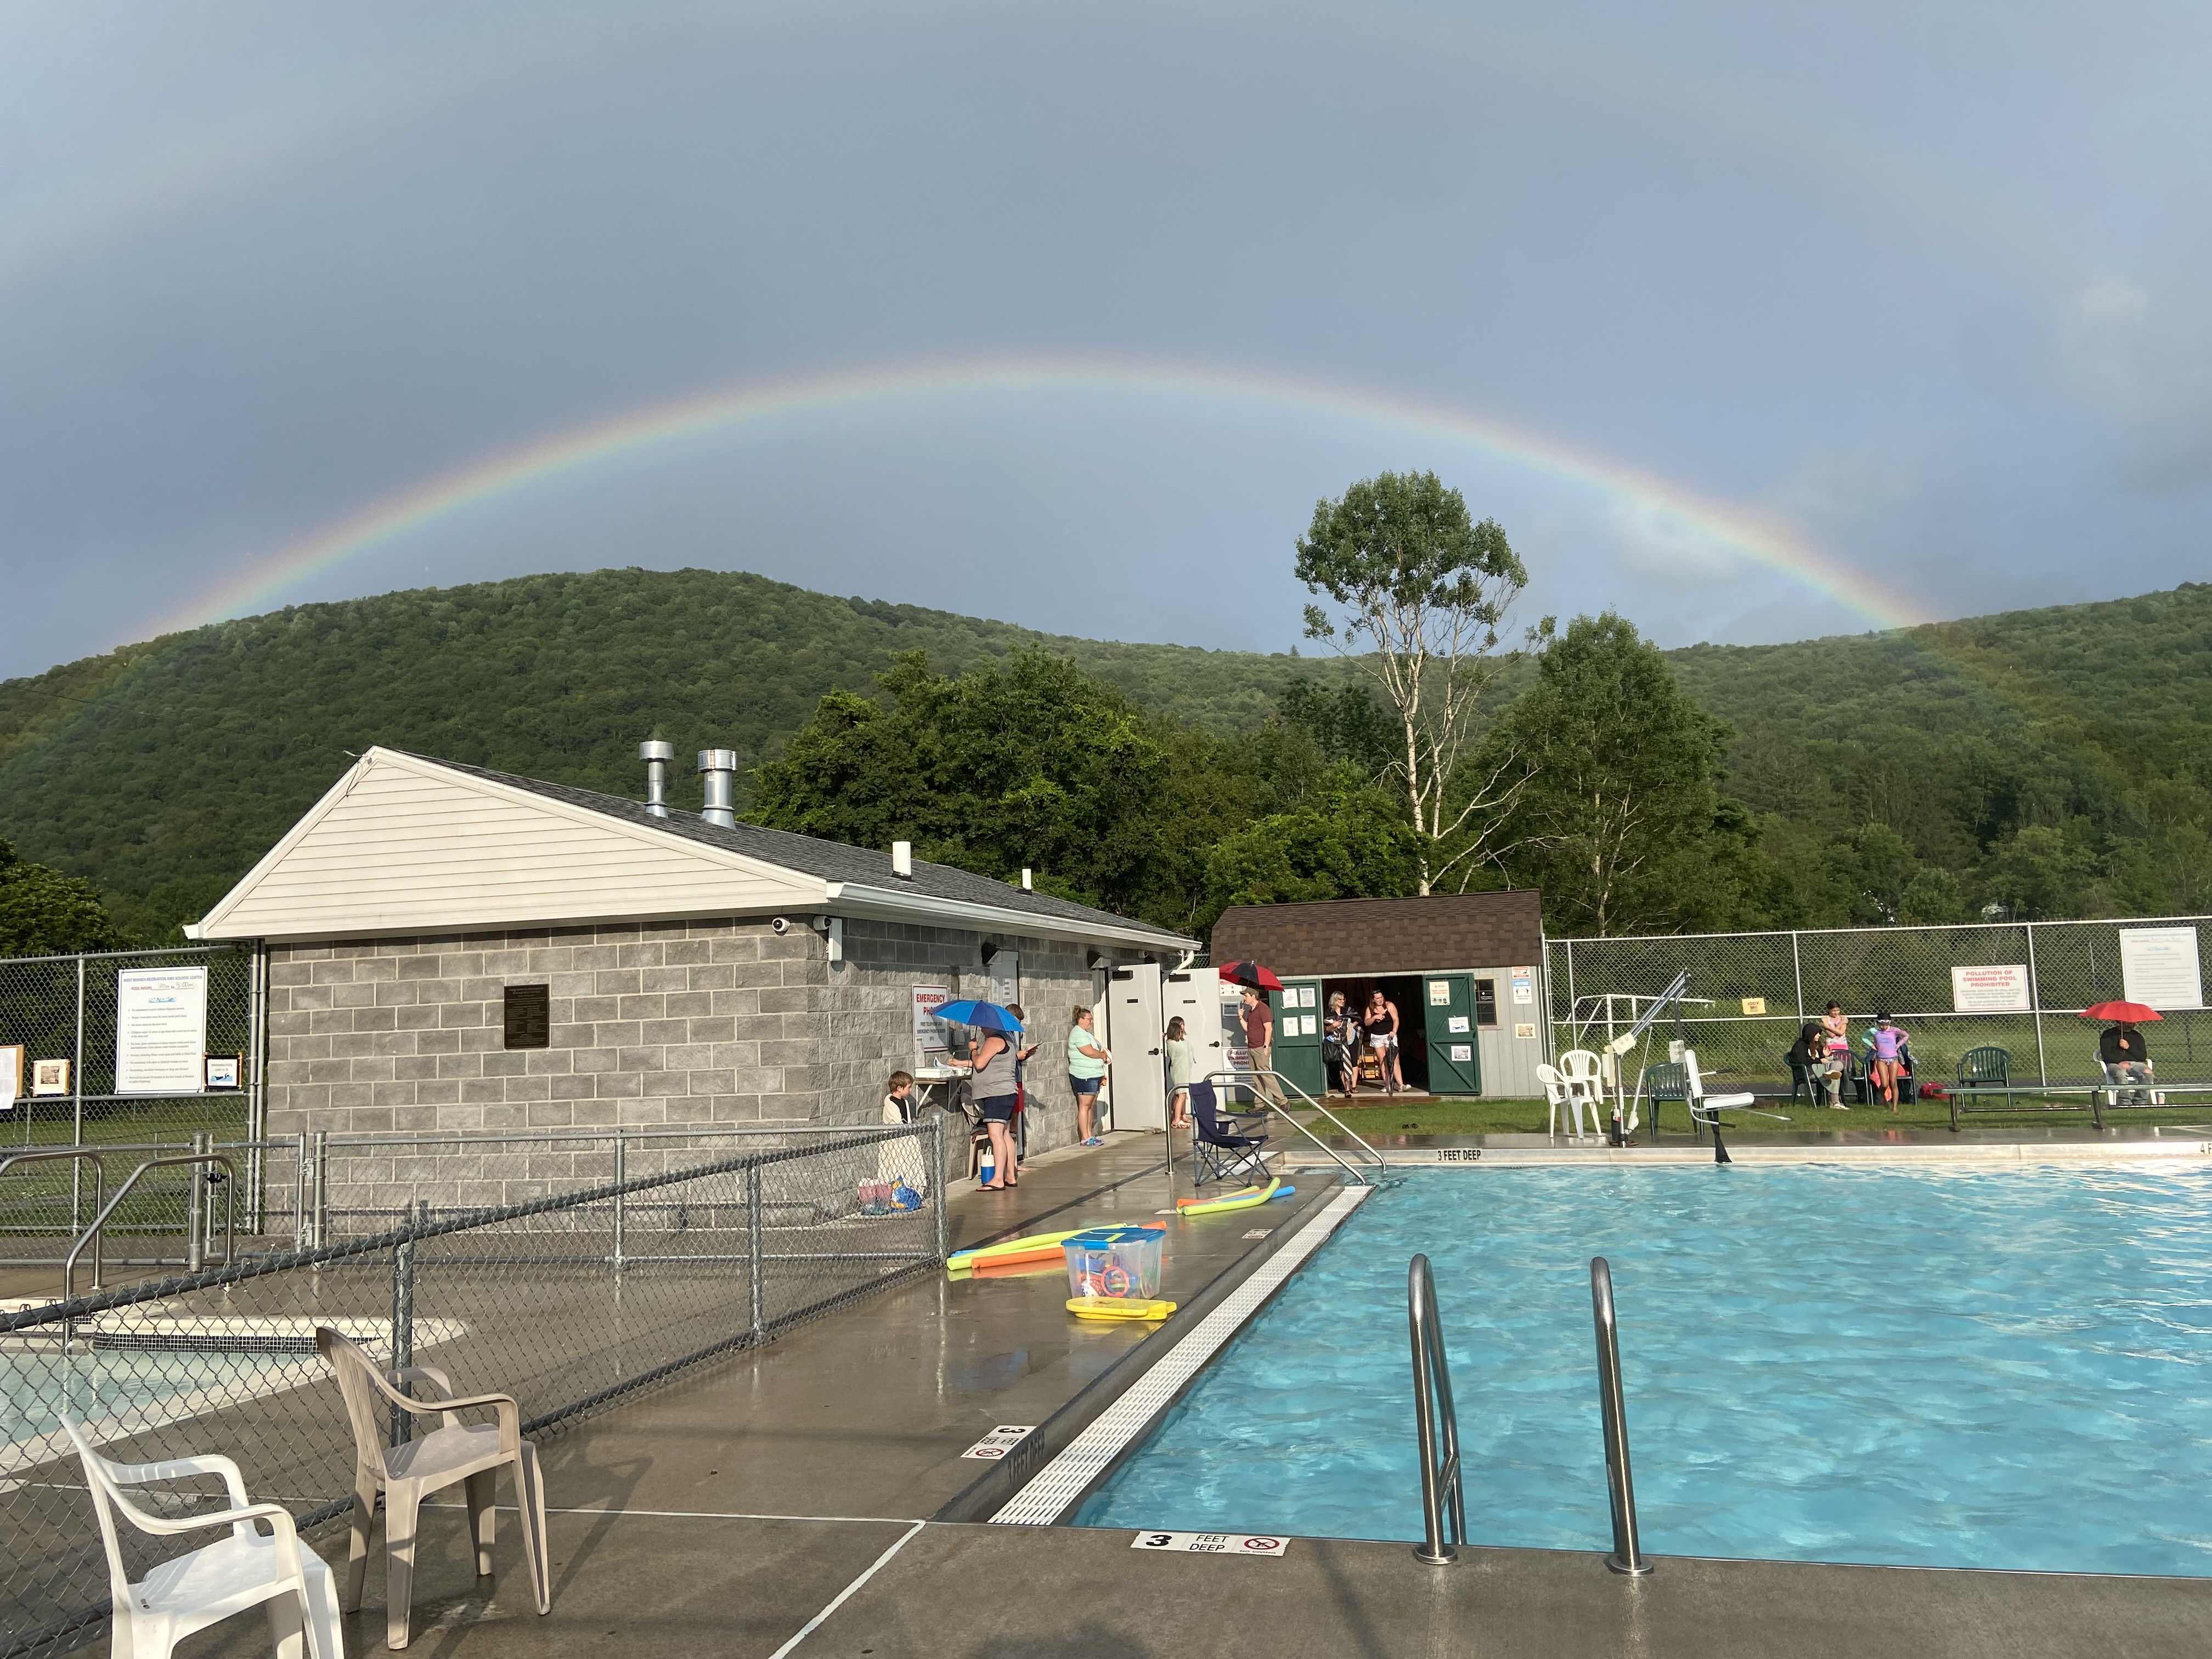 Rainbow at the Town of Delhi Pool